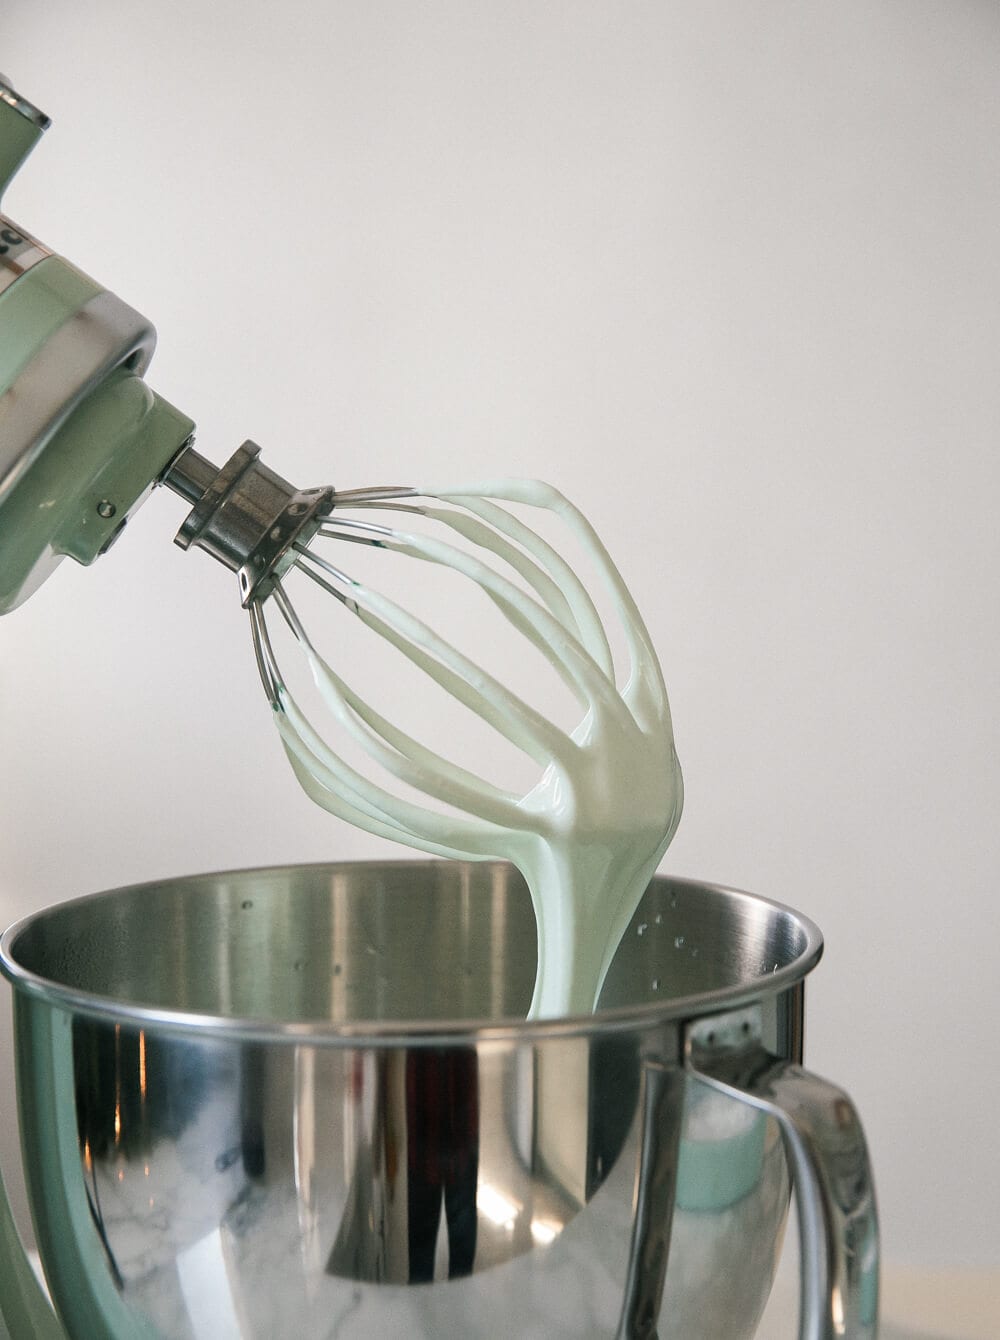 MIXERS 101: do I need a mixer for baking? - Mint + Mallow Kitchen